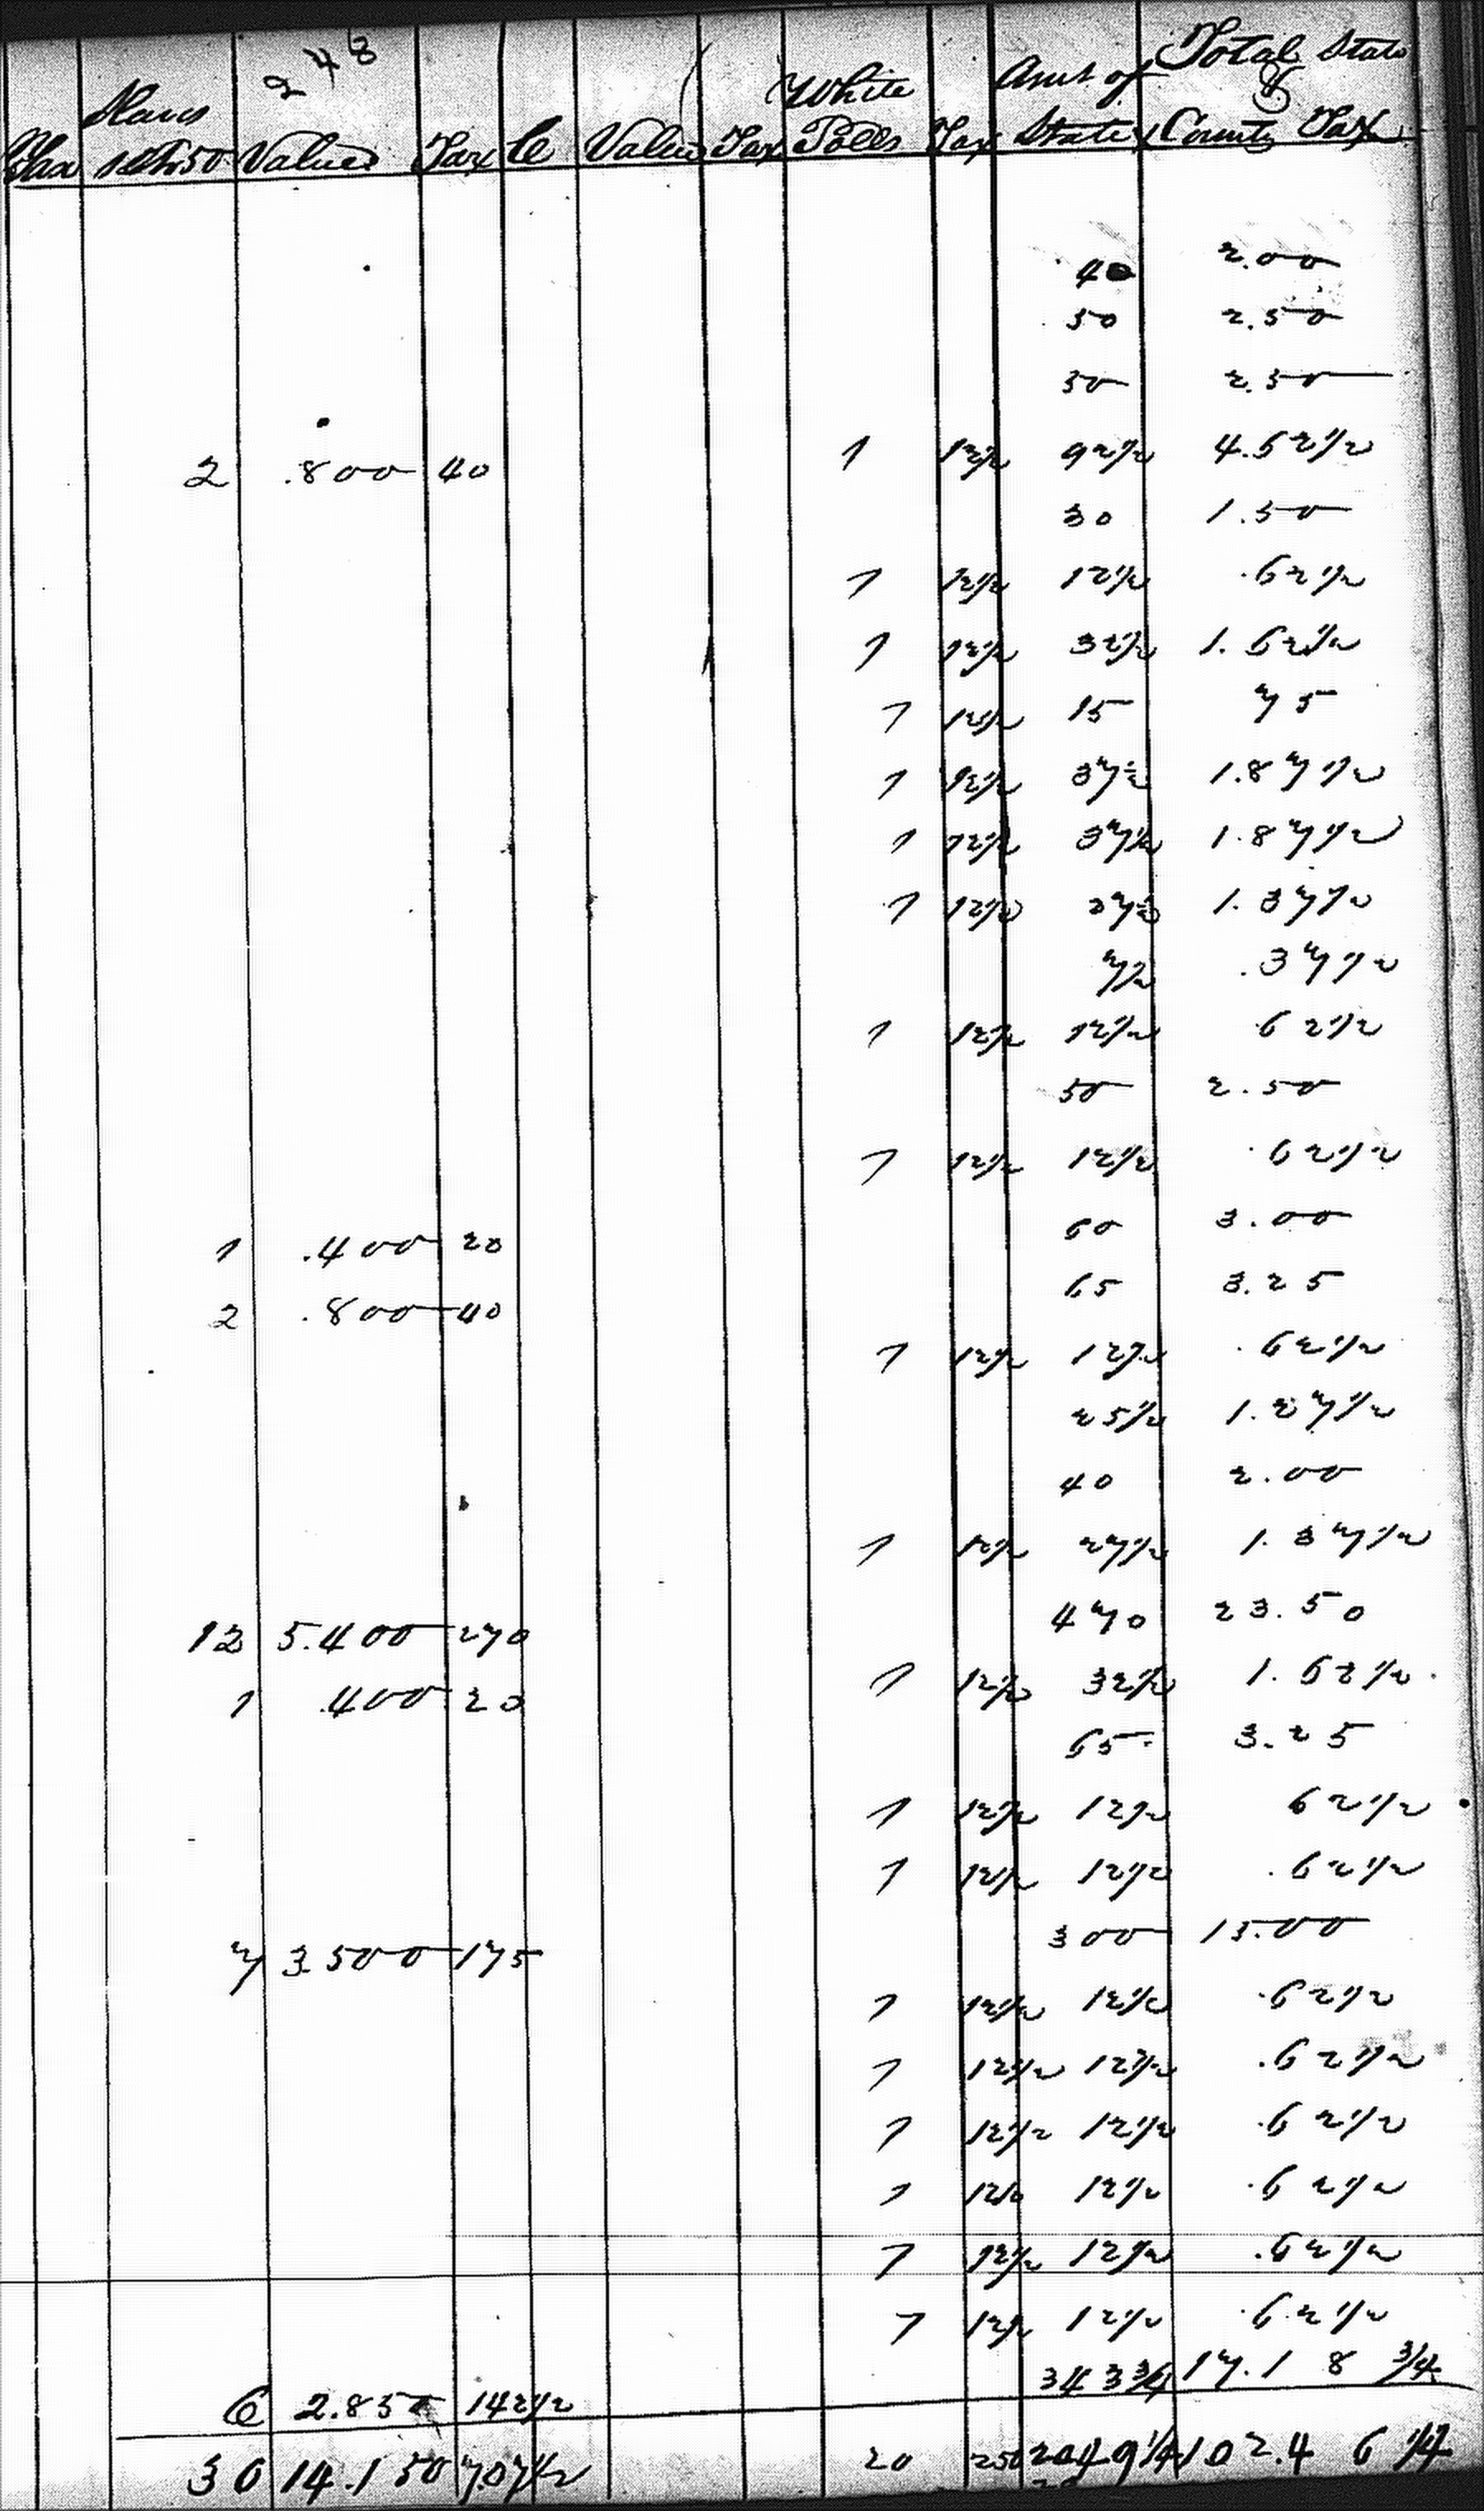 Anderson County Taxes, 1840, District 8, right half of first page